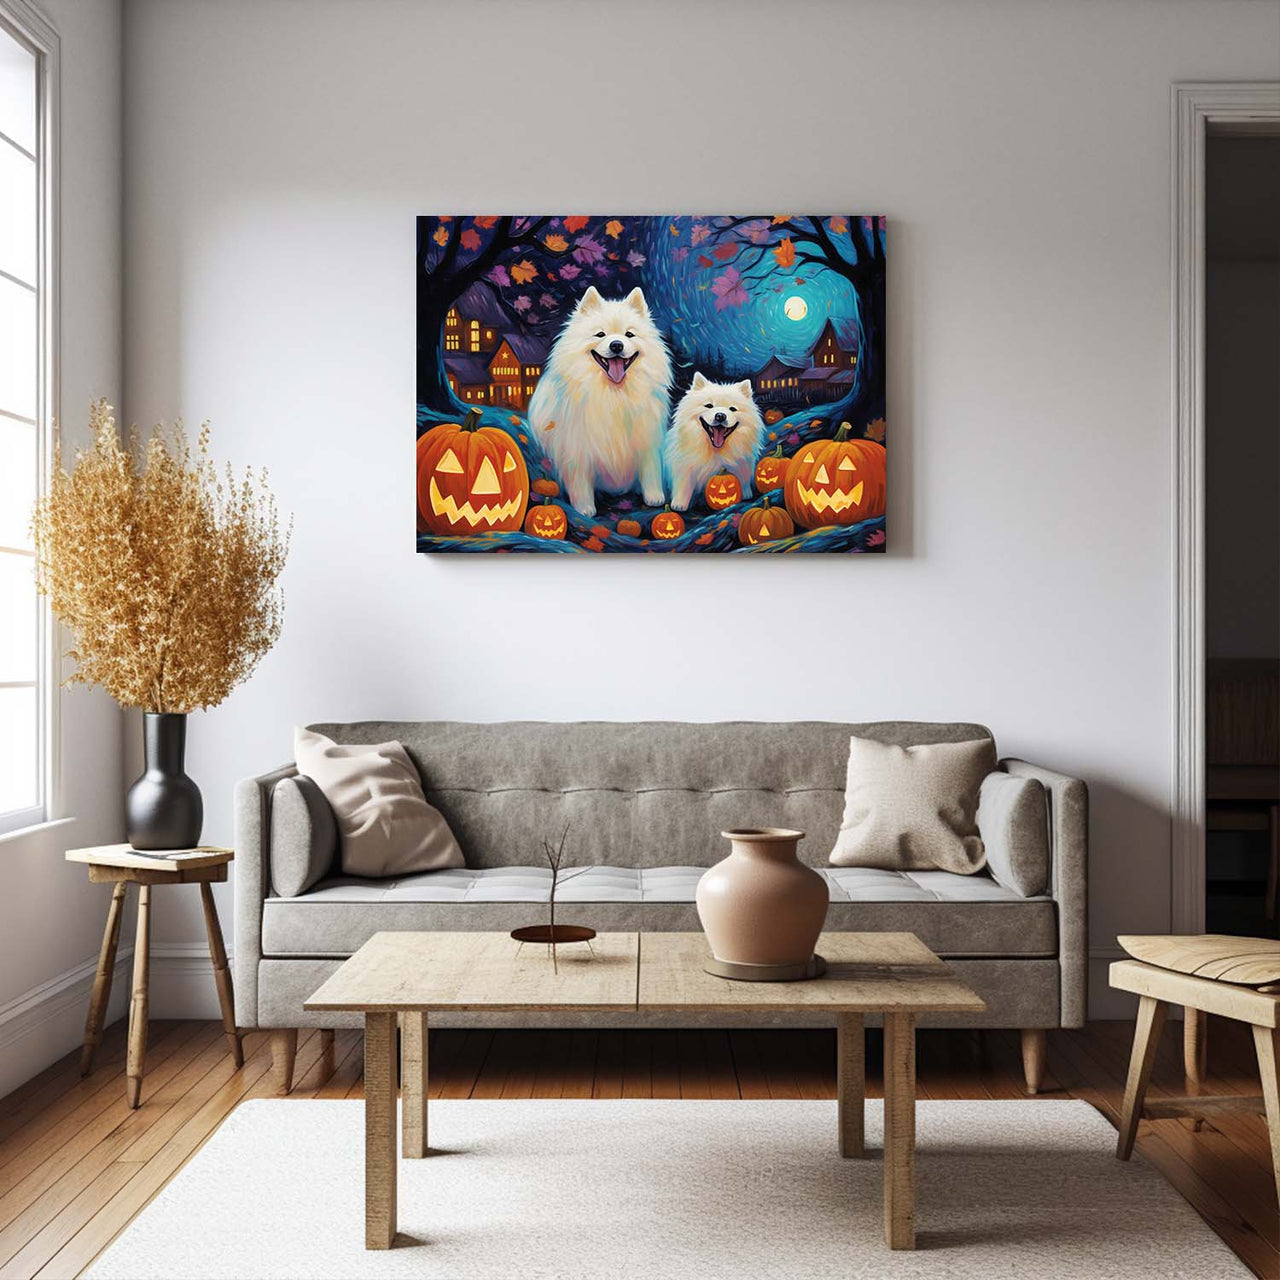 Samoyeds Dog 01 Halloween With Pumpkin Oil Painting Van Goh Style, Wooden Canvas Prints Wall Art Painting , Canvas 3d Art